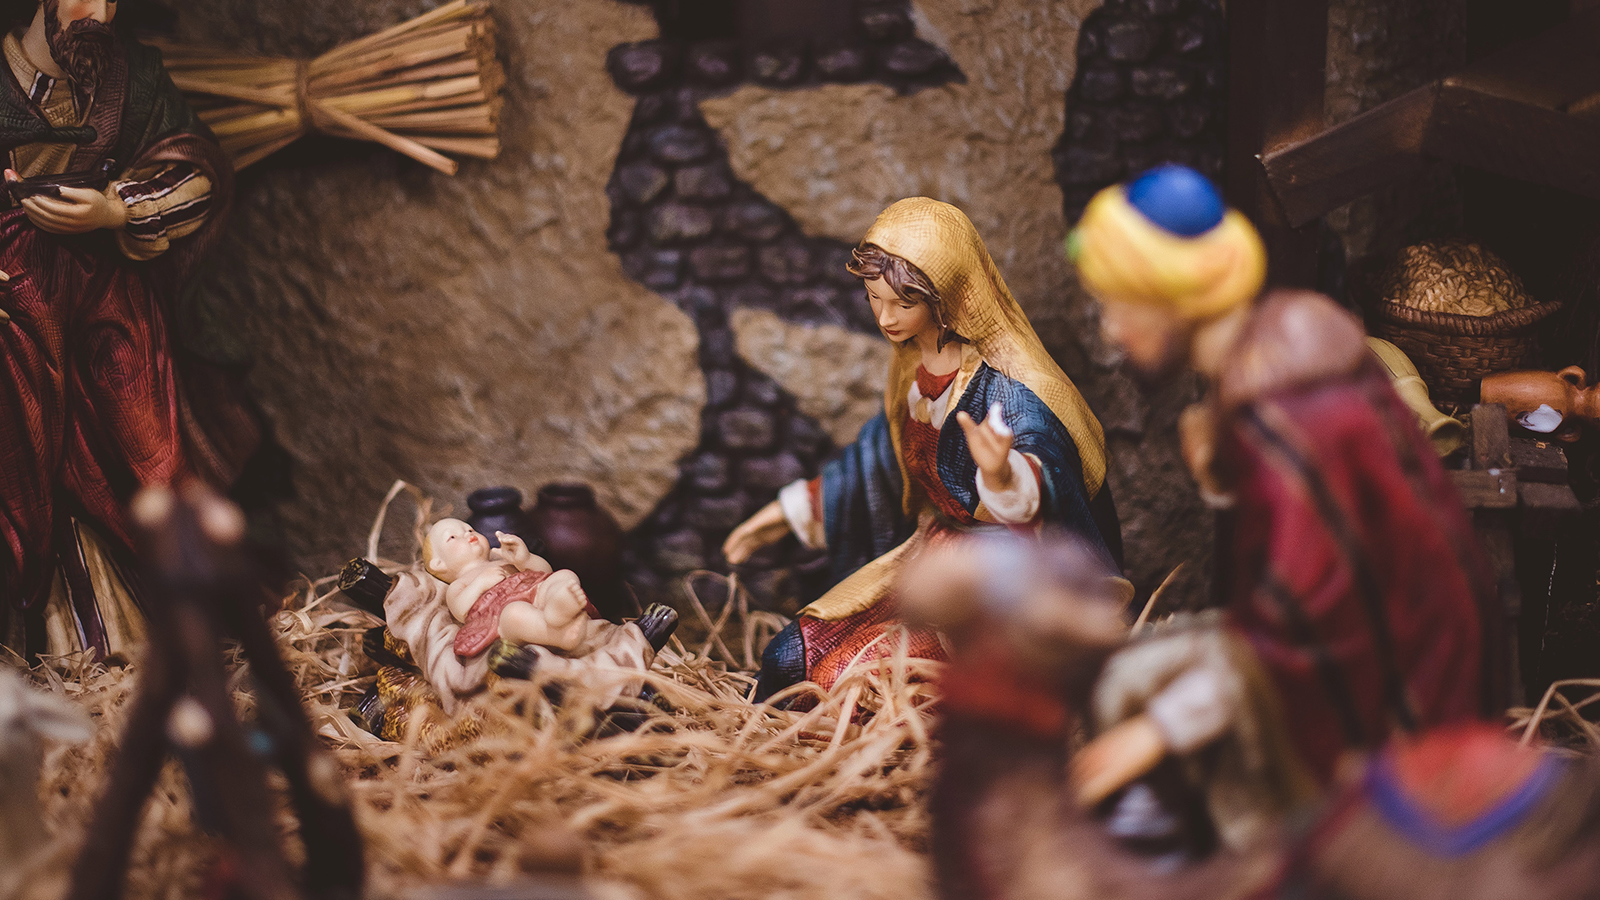 A manger scene with the focus on Mary and baby Jesus. Photo by Ben White/Unsplash/Creative Commons